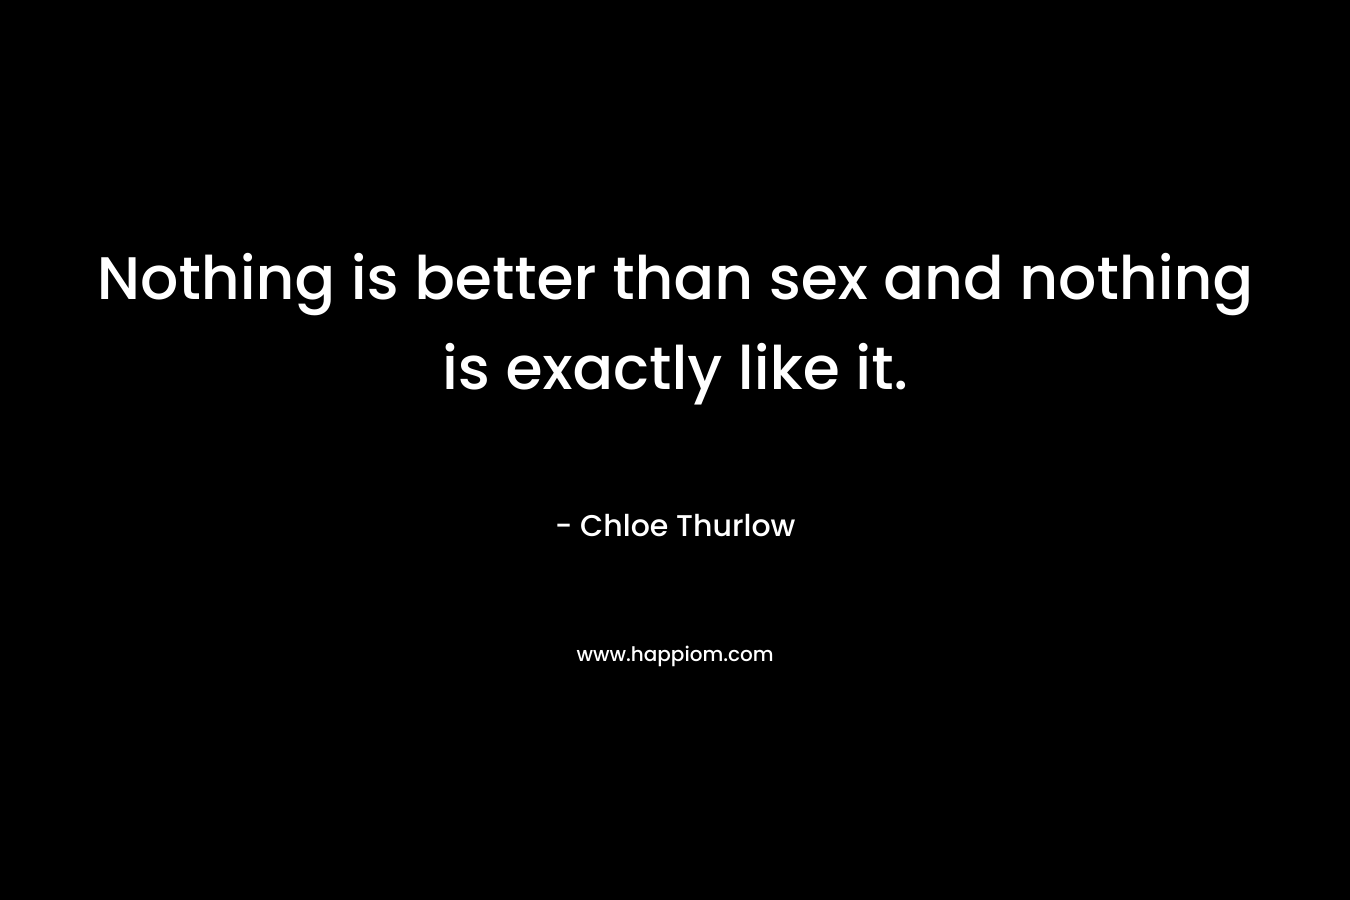 Nothing is better than sex and nothing is exactly like it.